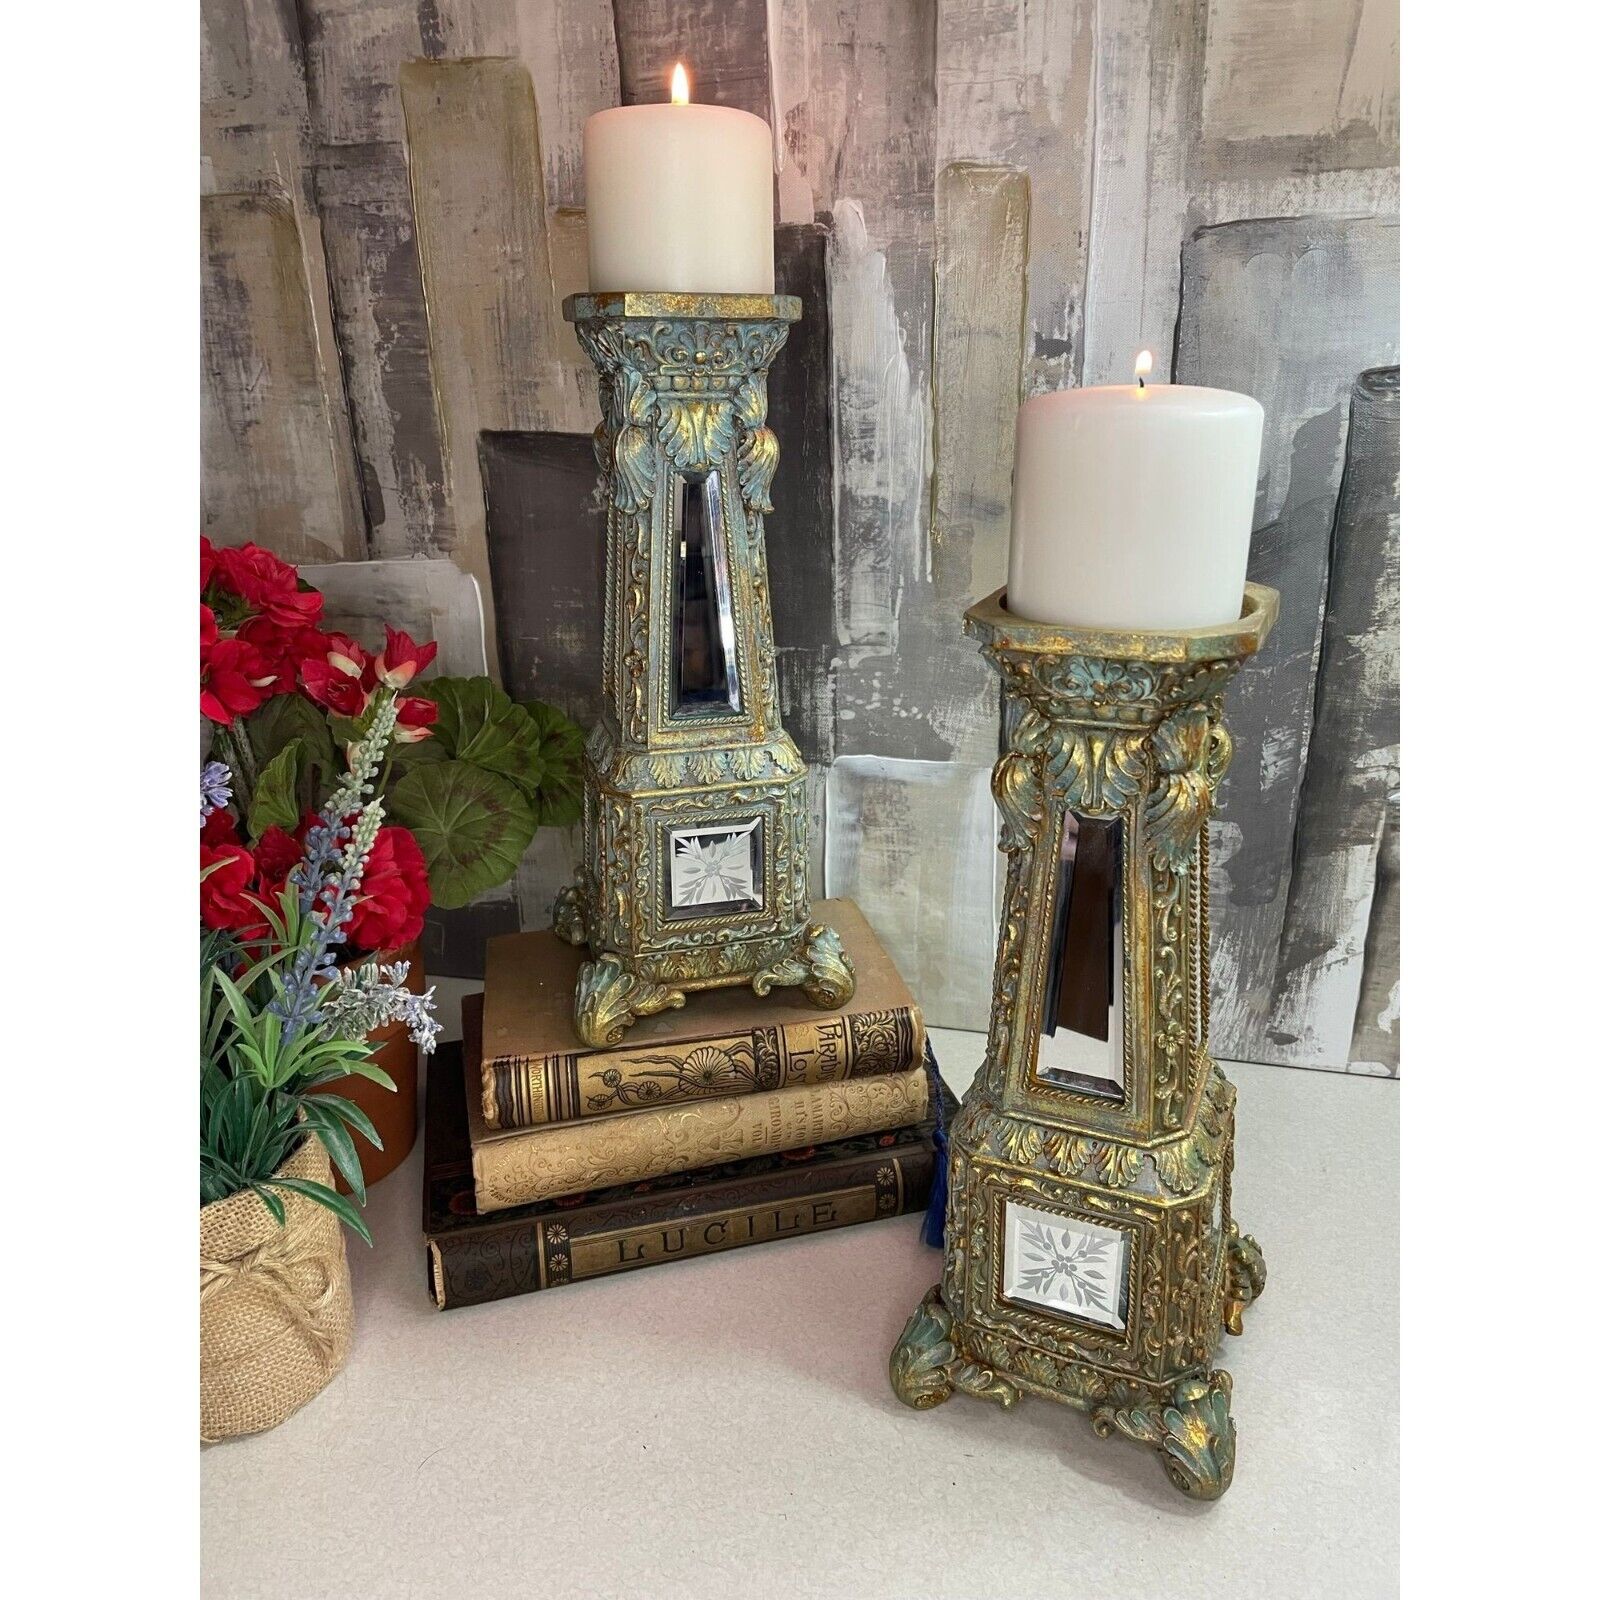 Stratford Home Ornate Mirror & Patina Pair Candle Holders Candlesticks Brass